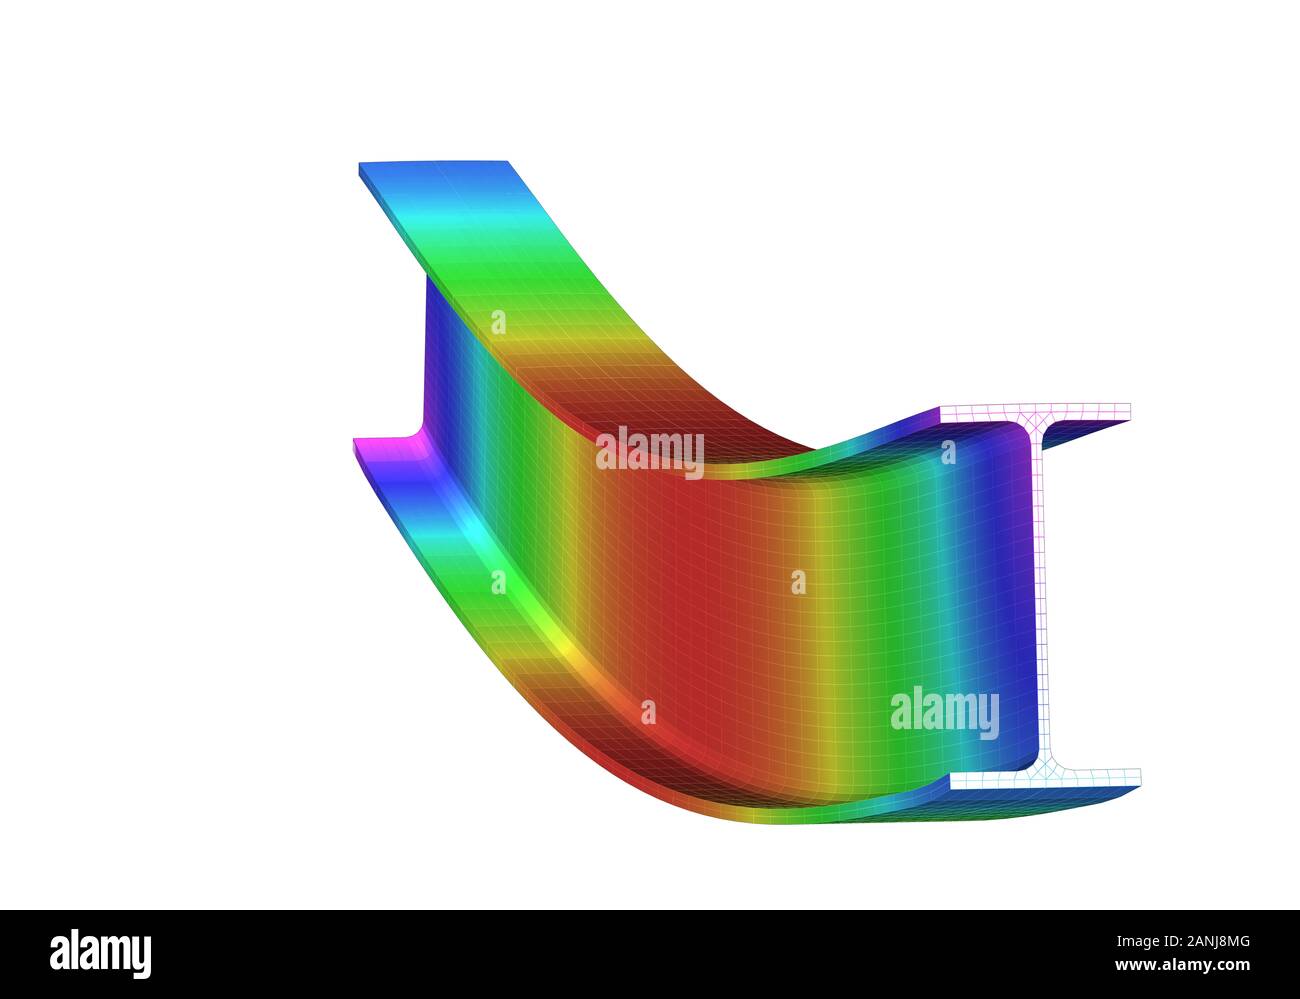 A Simple Supported I Beam Bending 3d View Of Mesh Deformation And Plot Of Deflections From Finite Element Analysis On White Backround Stock Photo Alamy